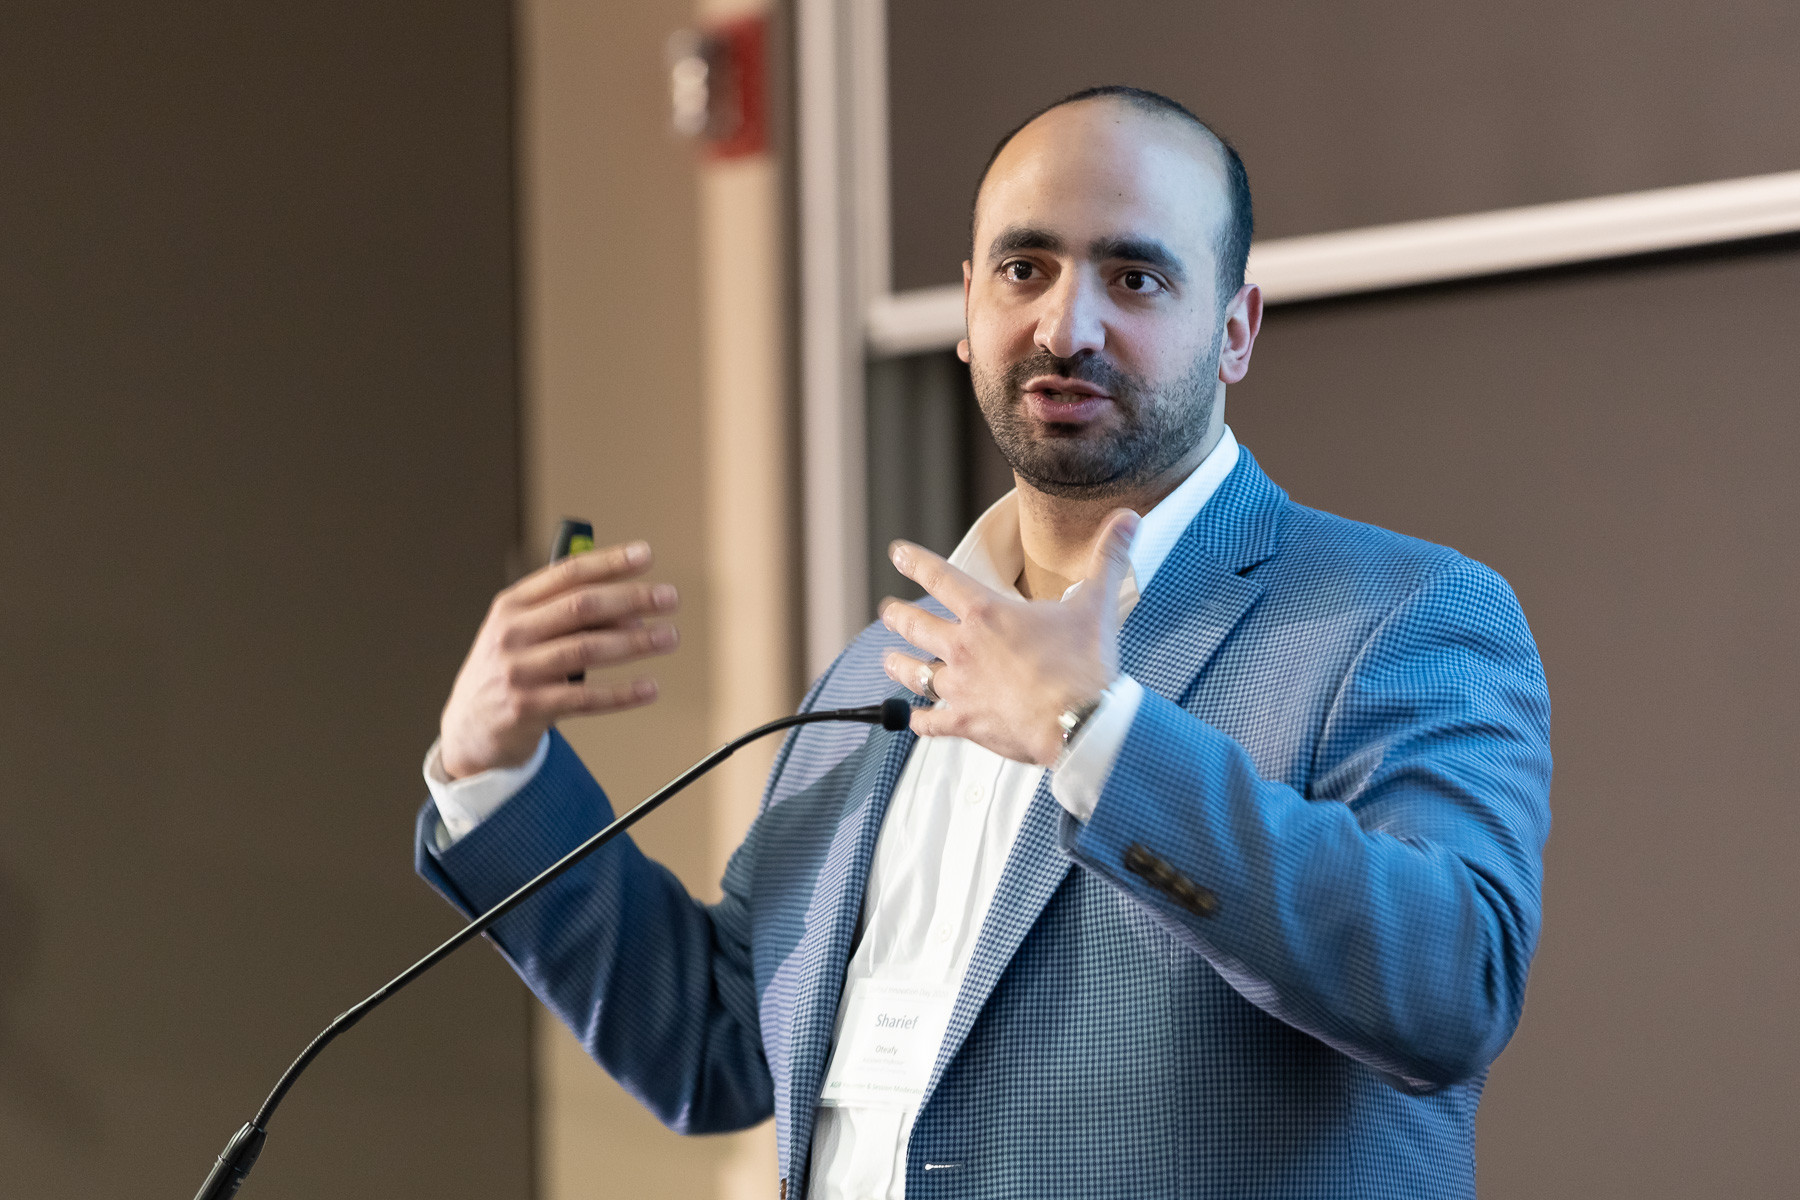 Sharief Oteafy, assistant professor in the College of Computing and Digital Media, presents his project, Next Generation Networking (NexGeN) Lab that will establish the very first Internet of Things (IoT) lab at DePaul. (DePaul University/Jeff Carrion)